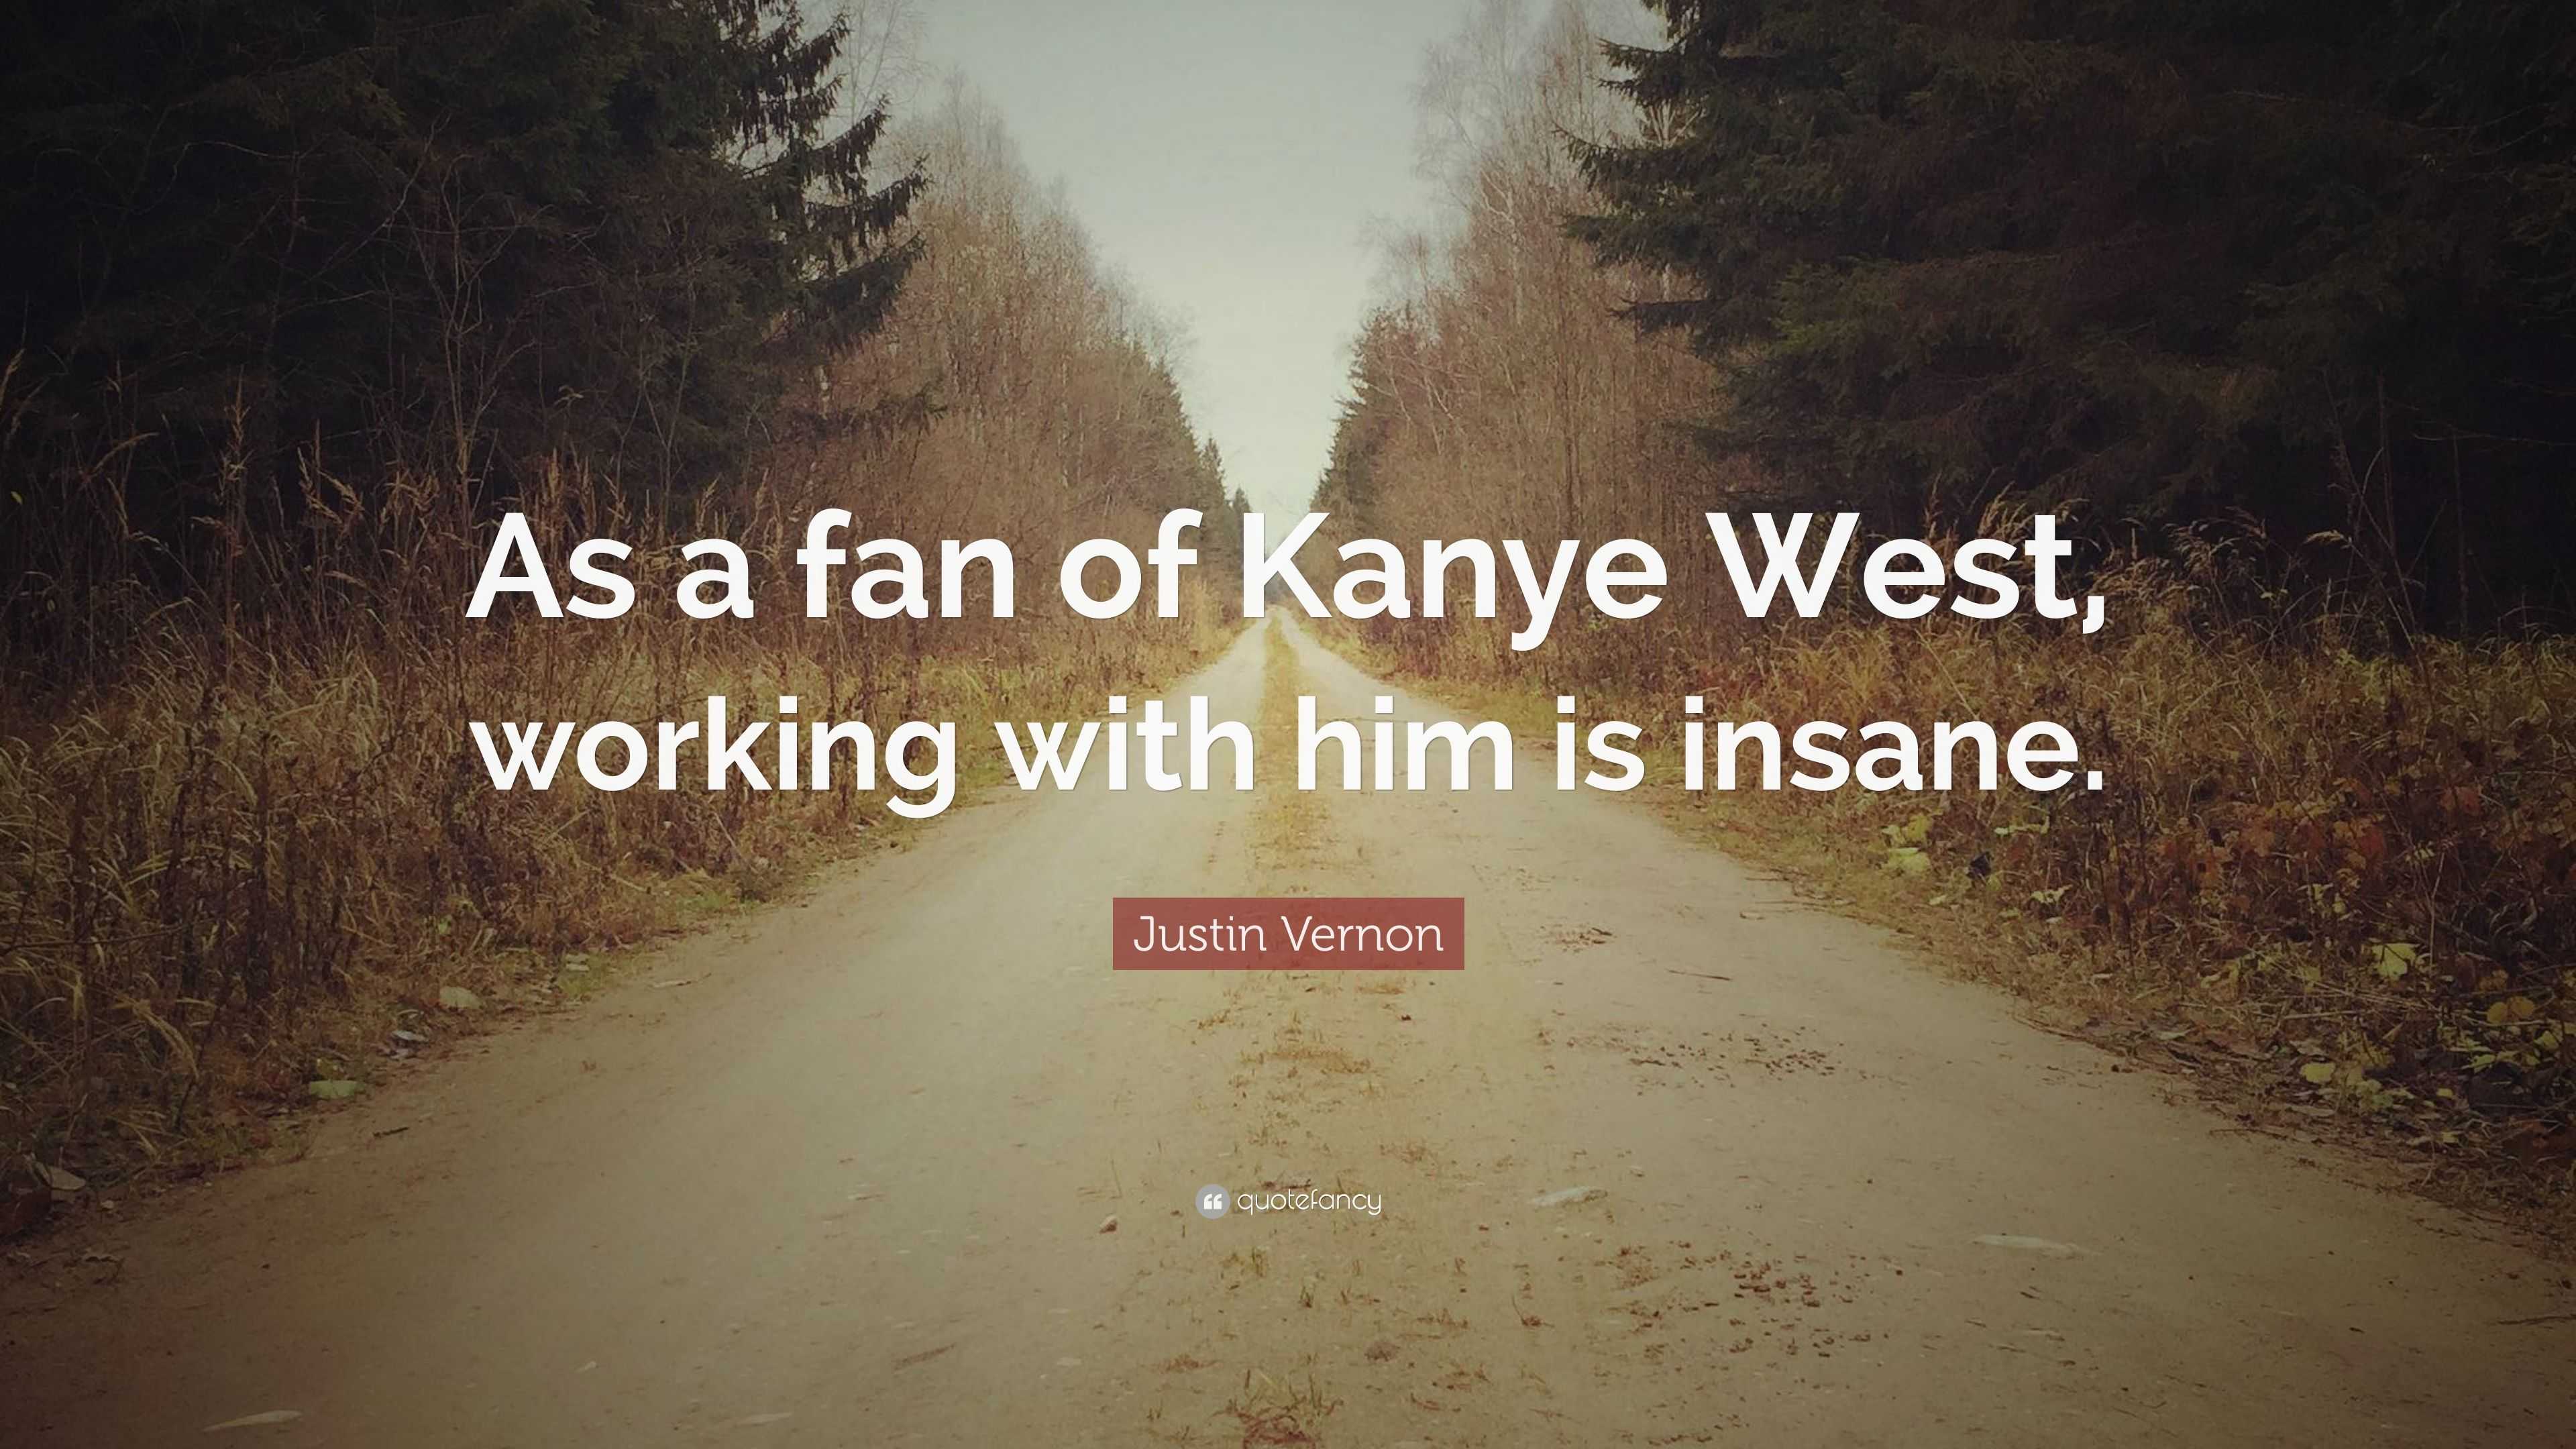 Kanye West Is Working for Himself